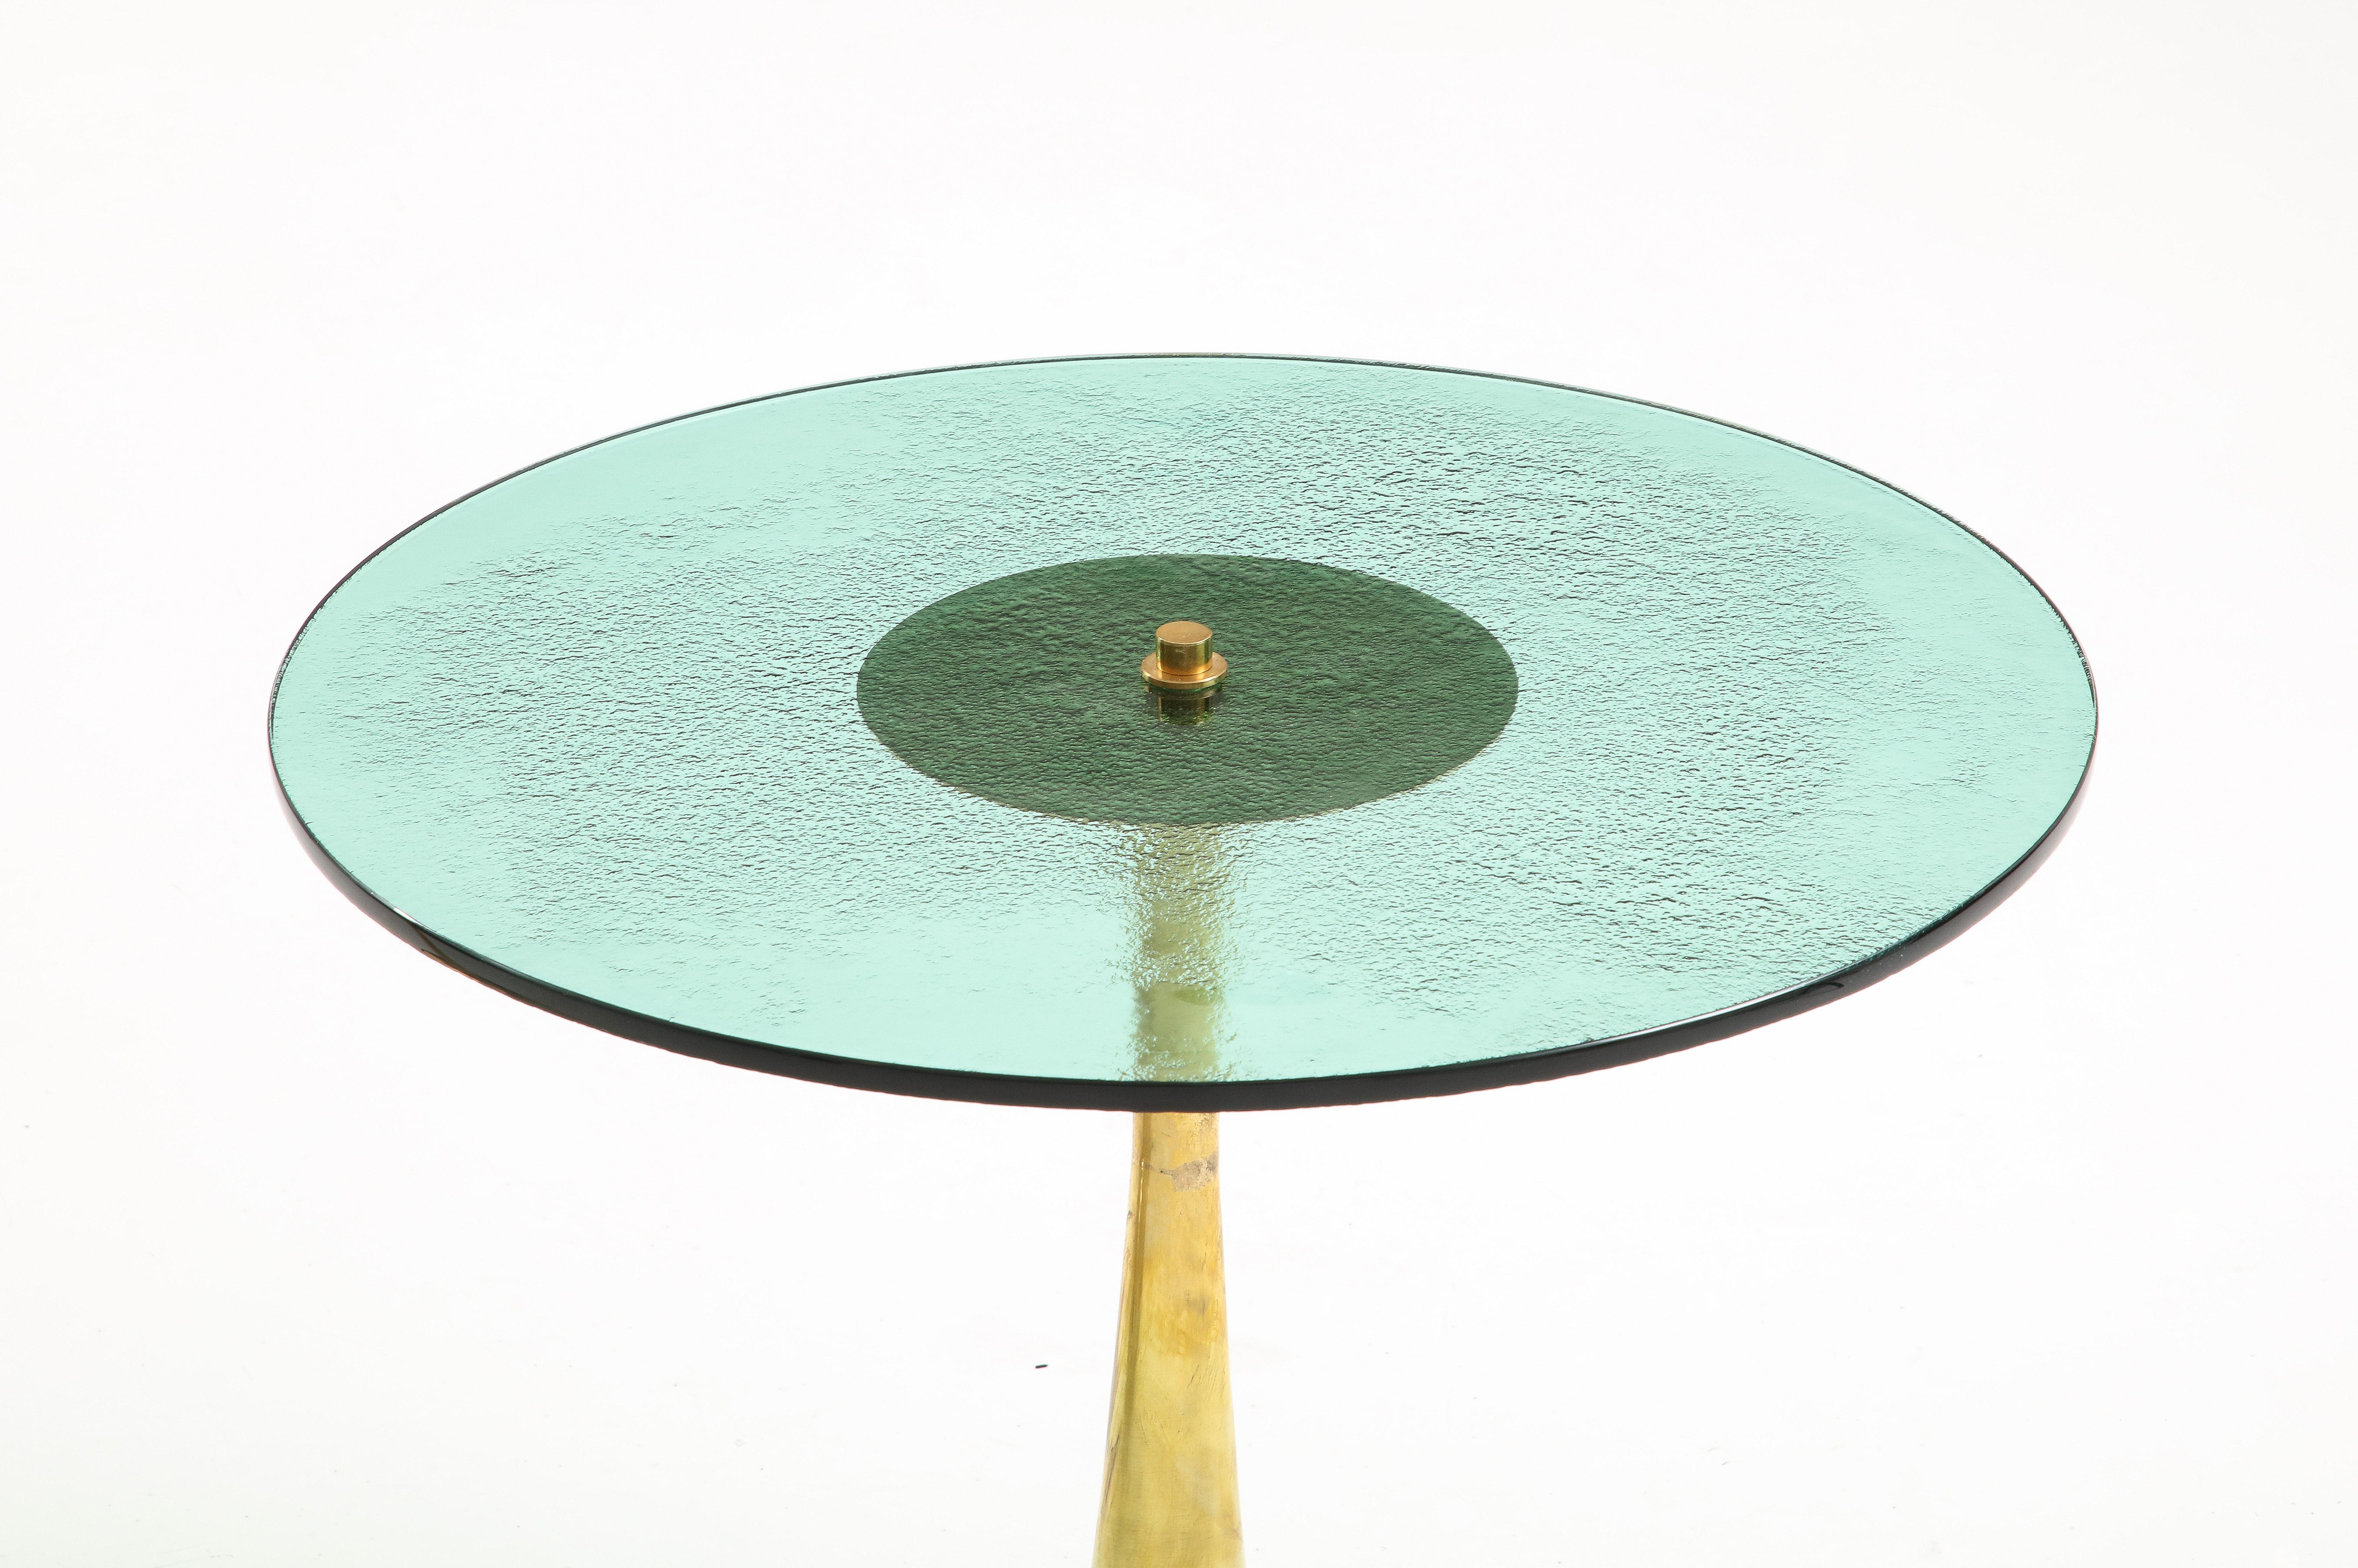 Contemporary Round Soft Green Murano Glass and Brass Martini or Side Table, Italy, 20.75